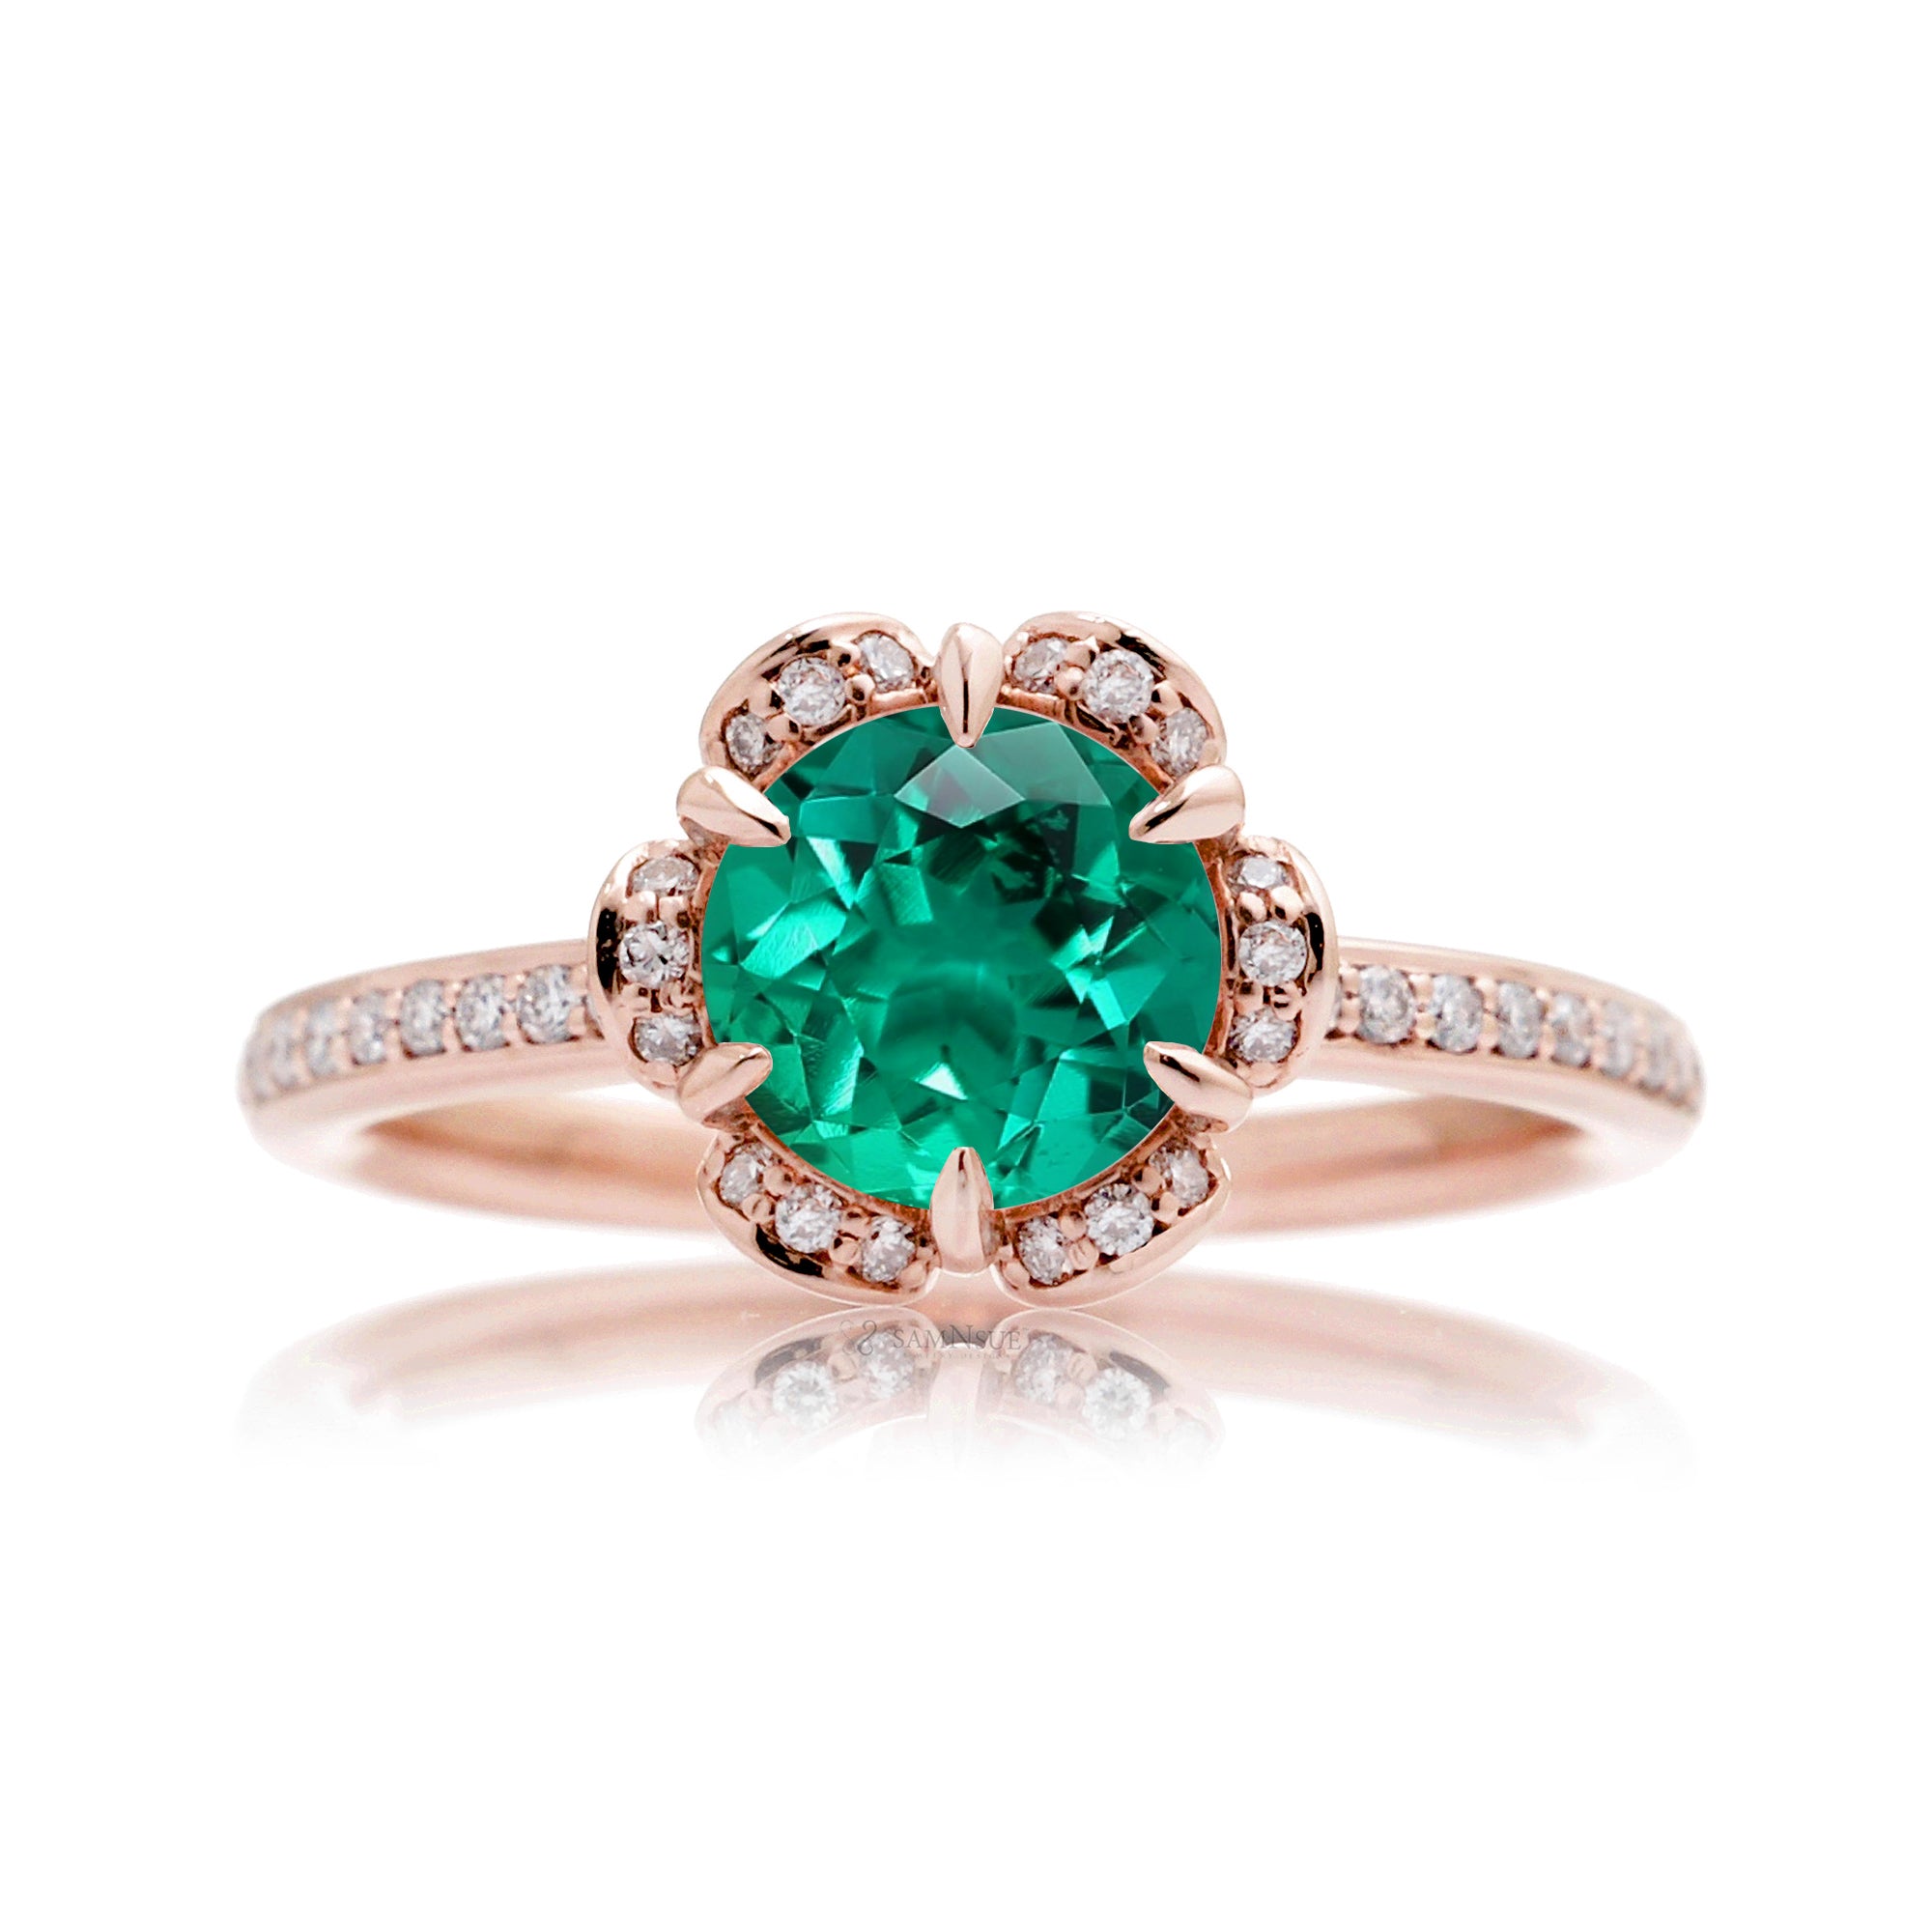 Floral lab-grown emerald engagement ring rose gold